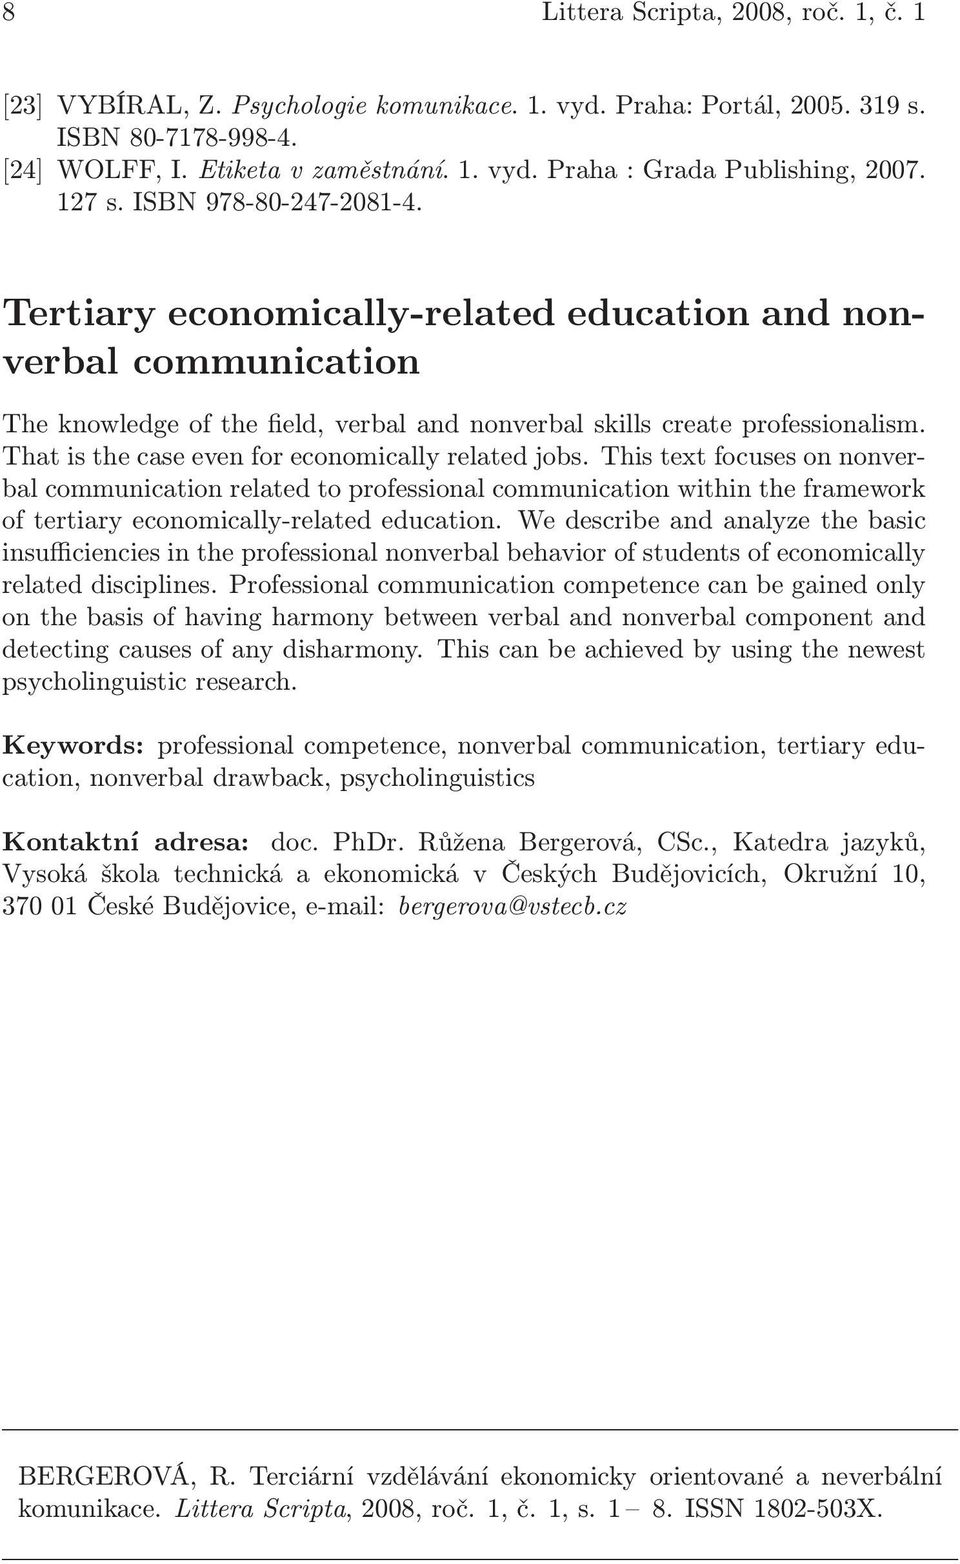 That is the case even for economically related jobs. This text focuses on nonverbal communication related to professional communication within the framework of tertiary economically-related education.